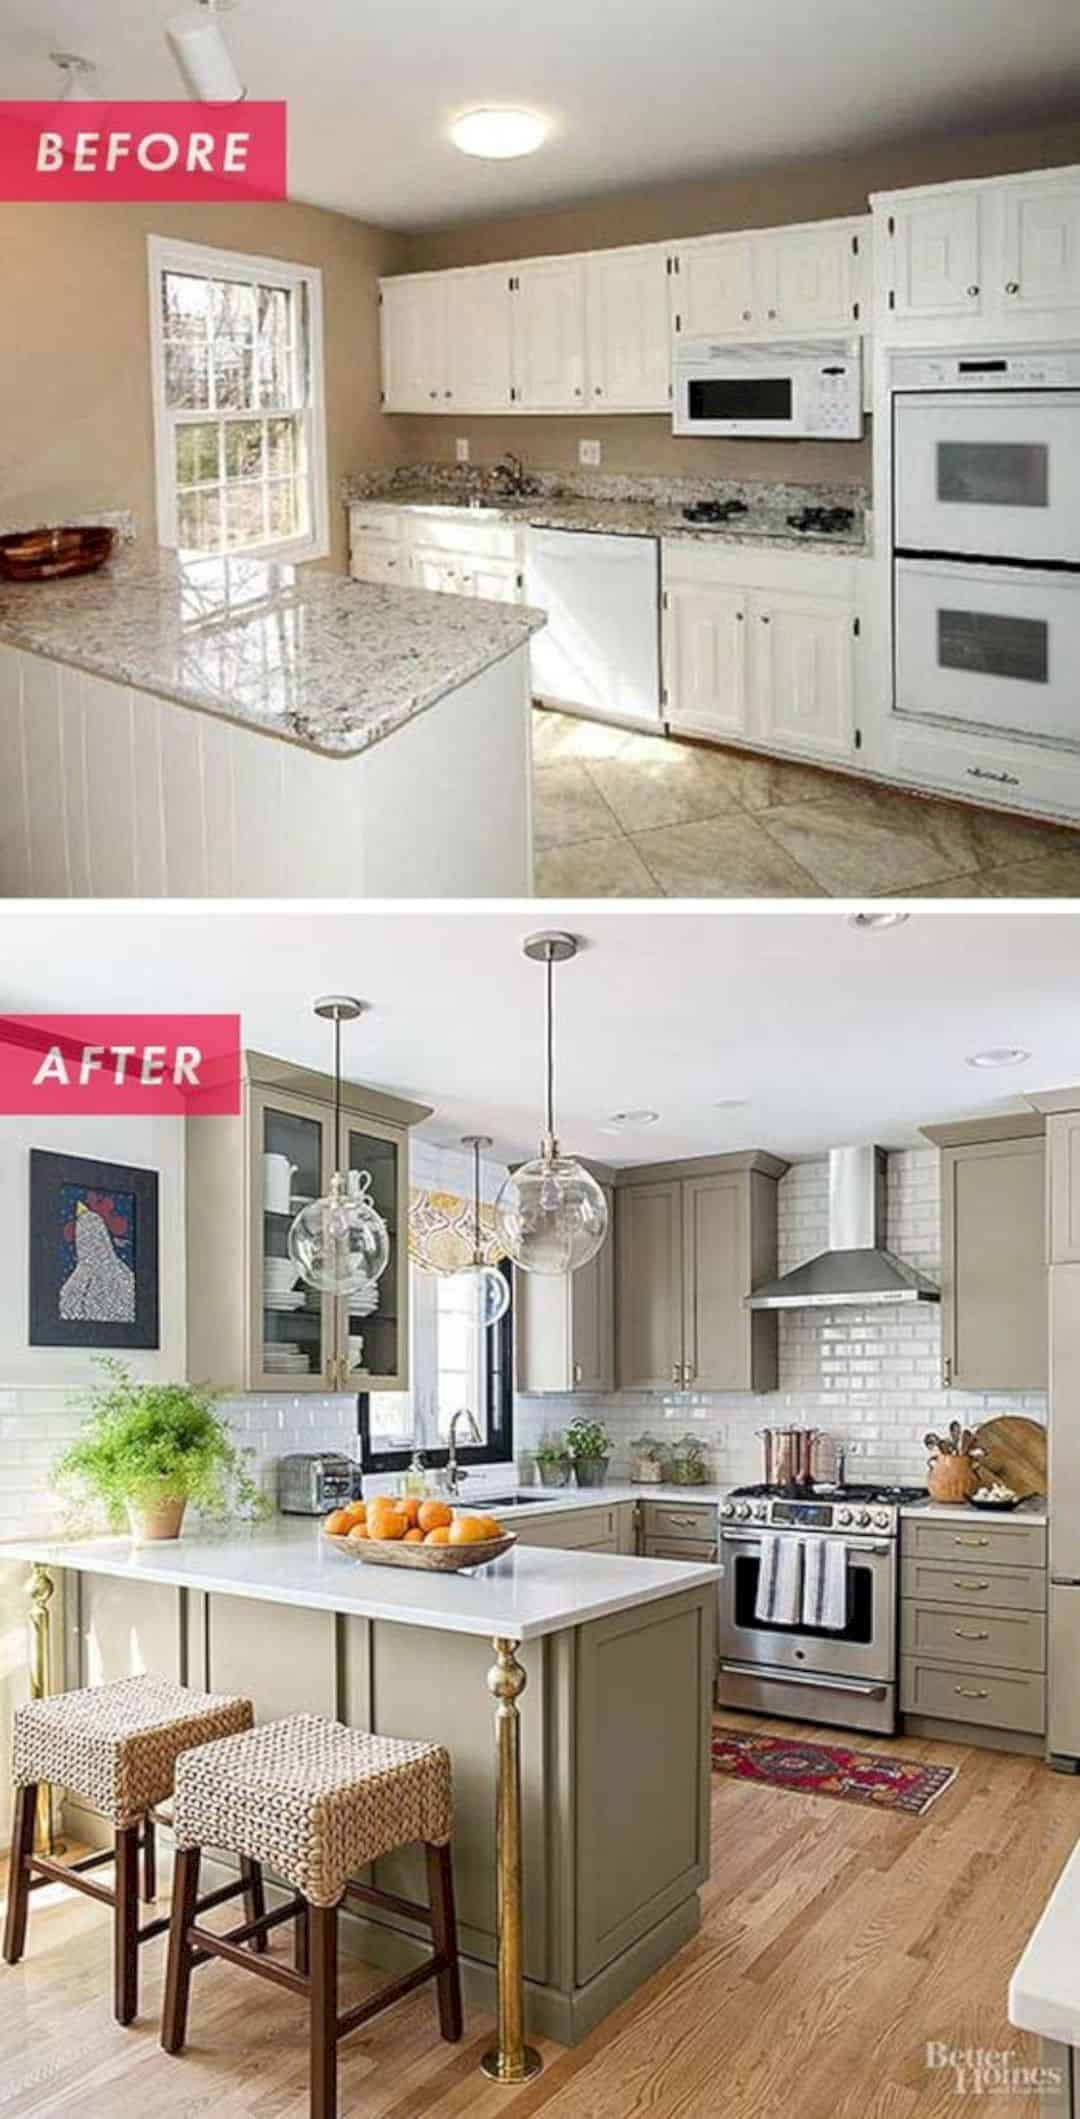 Small Kitchen Renovation Ideas
 15 Clever Renovation Ideas to Update Your Small Kitchen